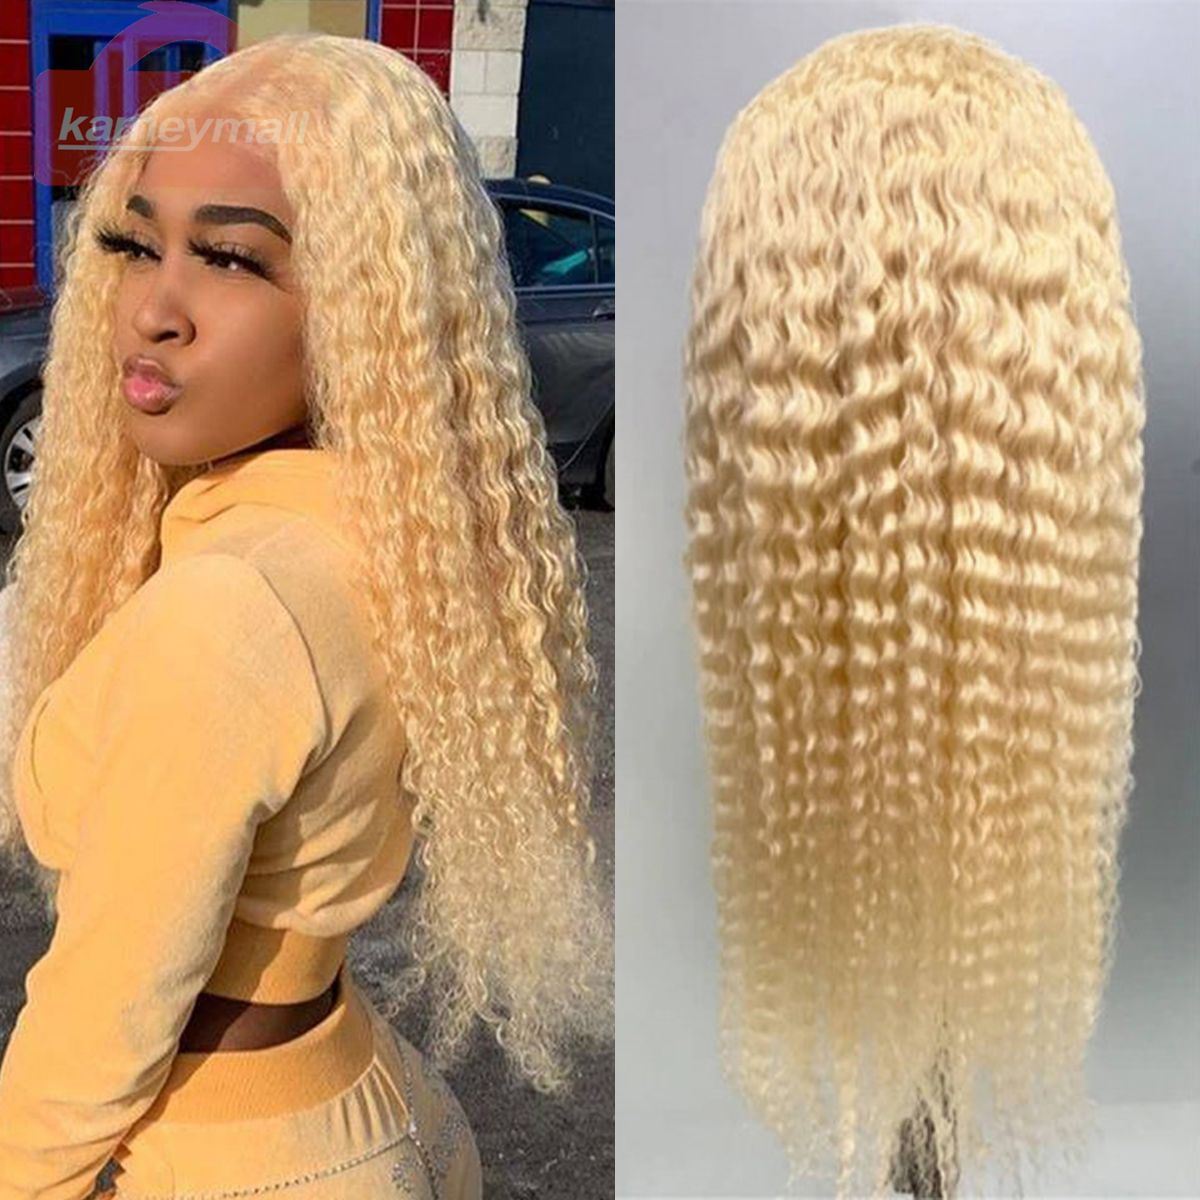 blond long curly wig